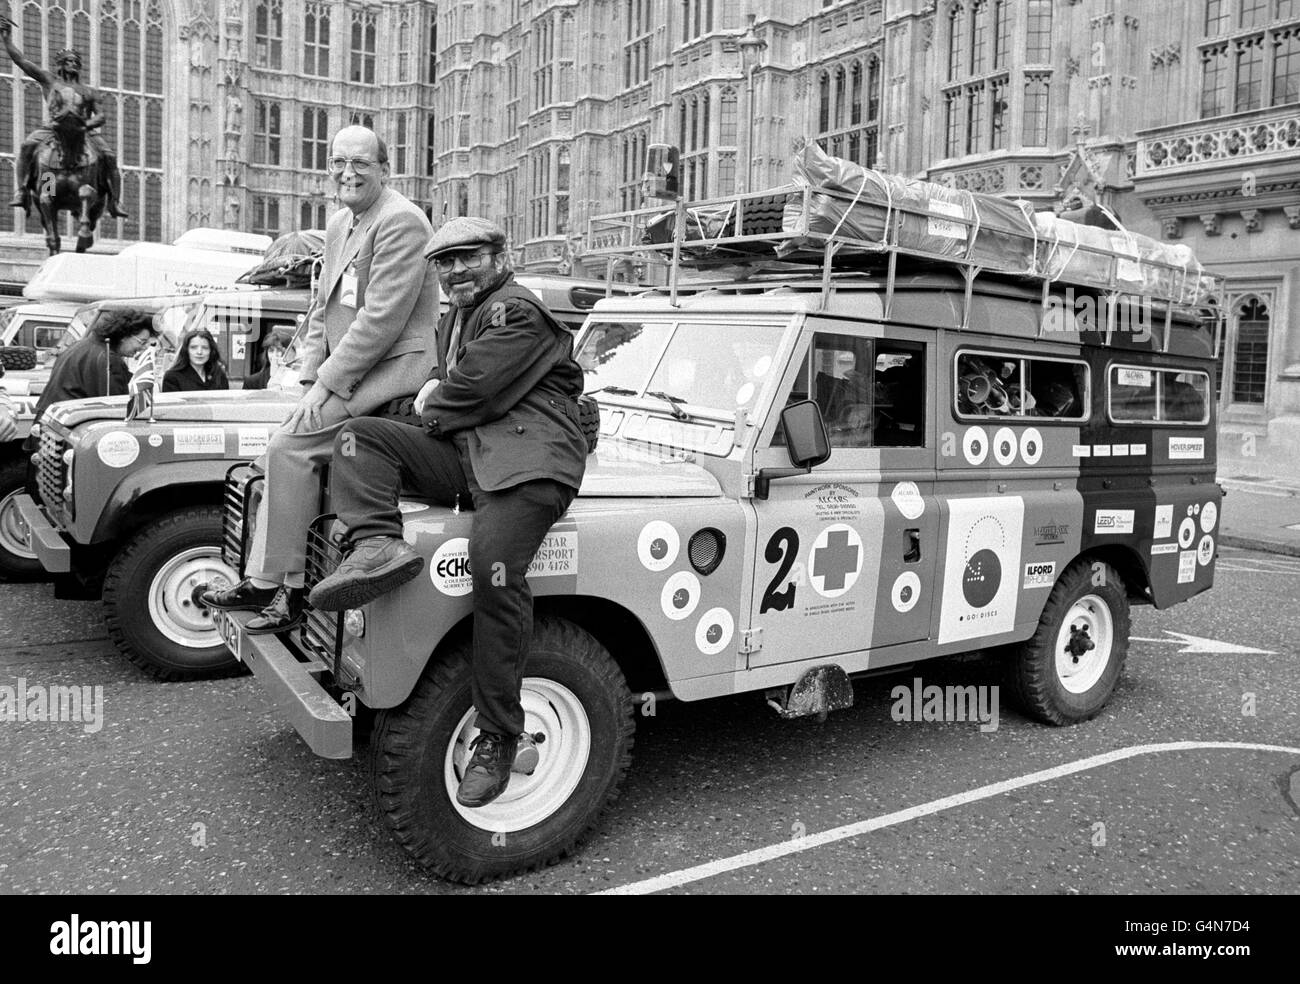 Bob Hoskins, right, and Lord Winchilsea, founder of the Saharaman Aid Trust, outside the House of Lords in London, before setting off for a long charity drive to Southern Algeria. They are amongst 40 drivers making the Journey in 15 Land Rovers and a London taxi to raise money for Saharawi refugees living in camps since their land was annexed by Morocco 13 years previously. Stock Photo